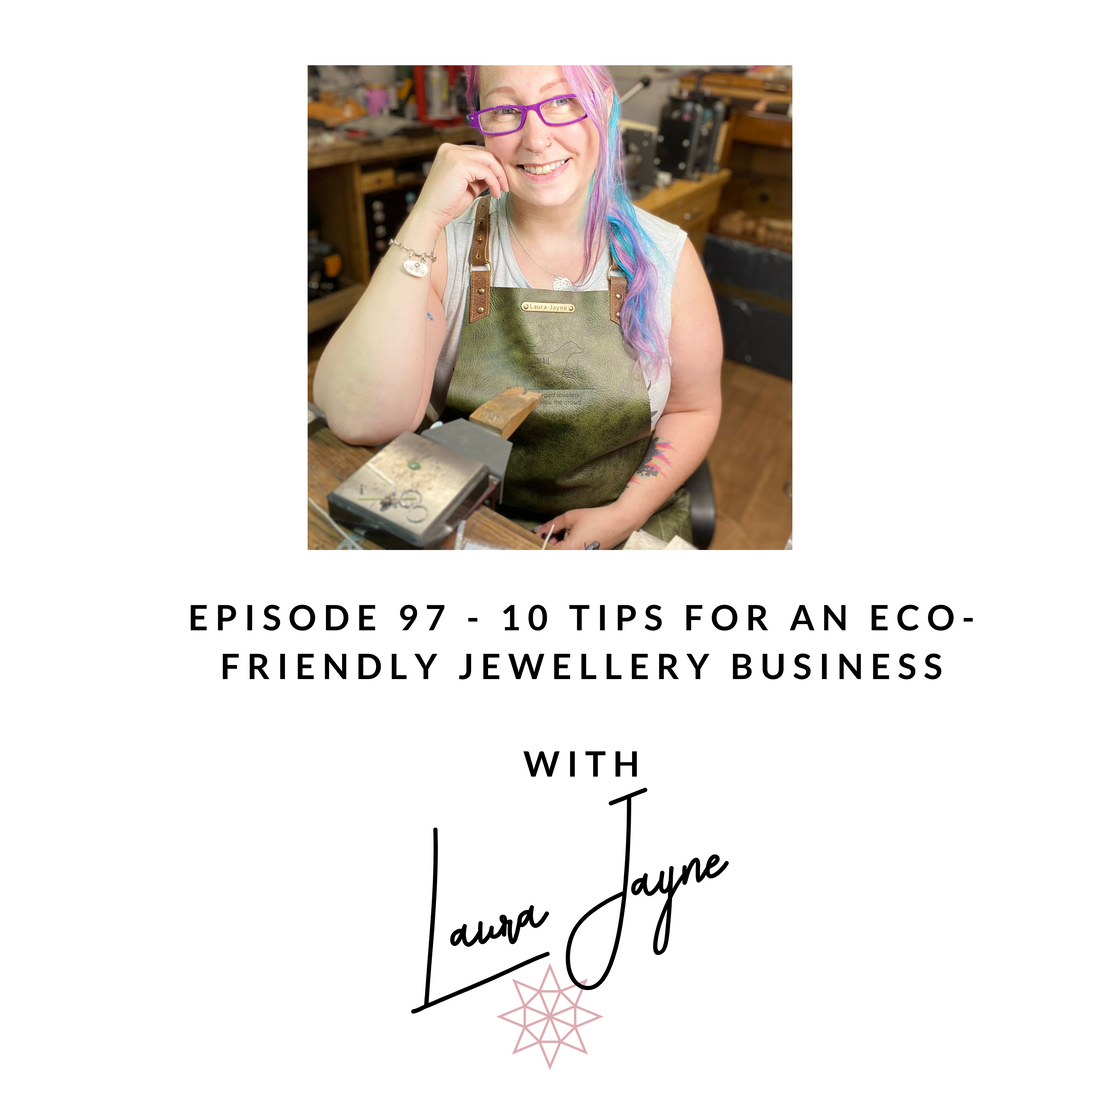 Listen to me chat with Jewellers Academy